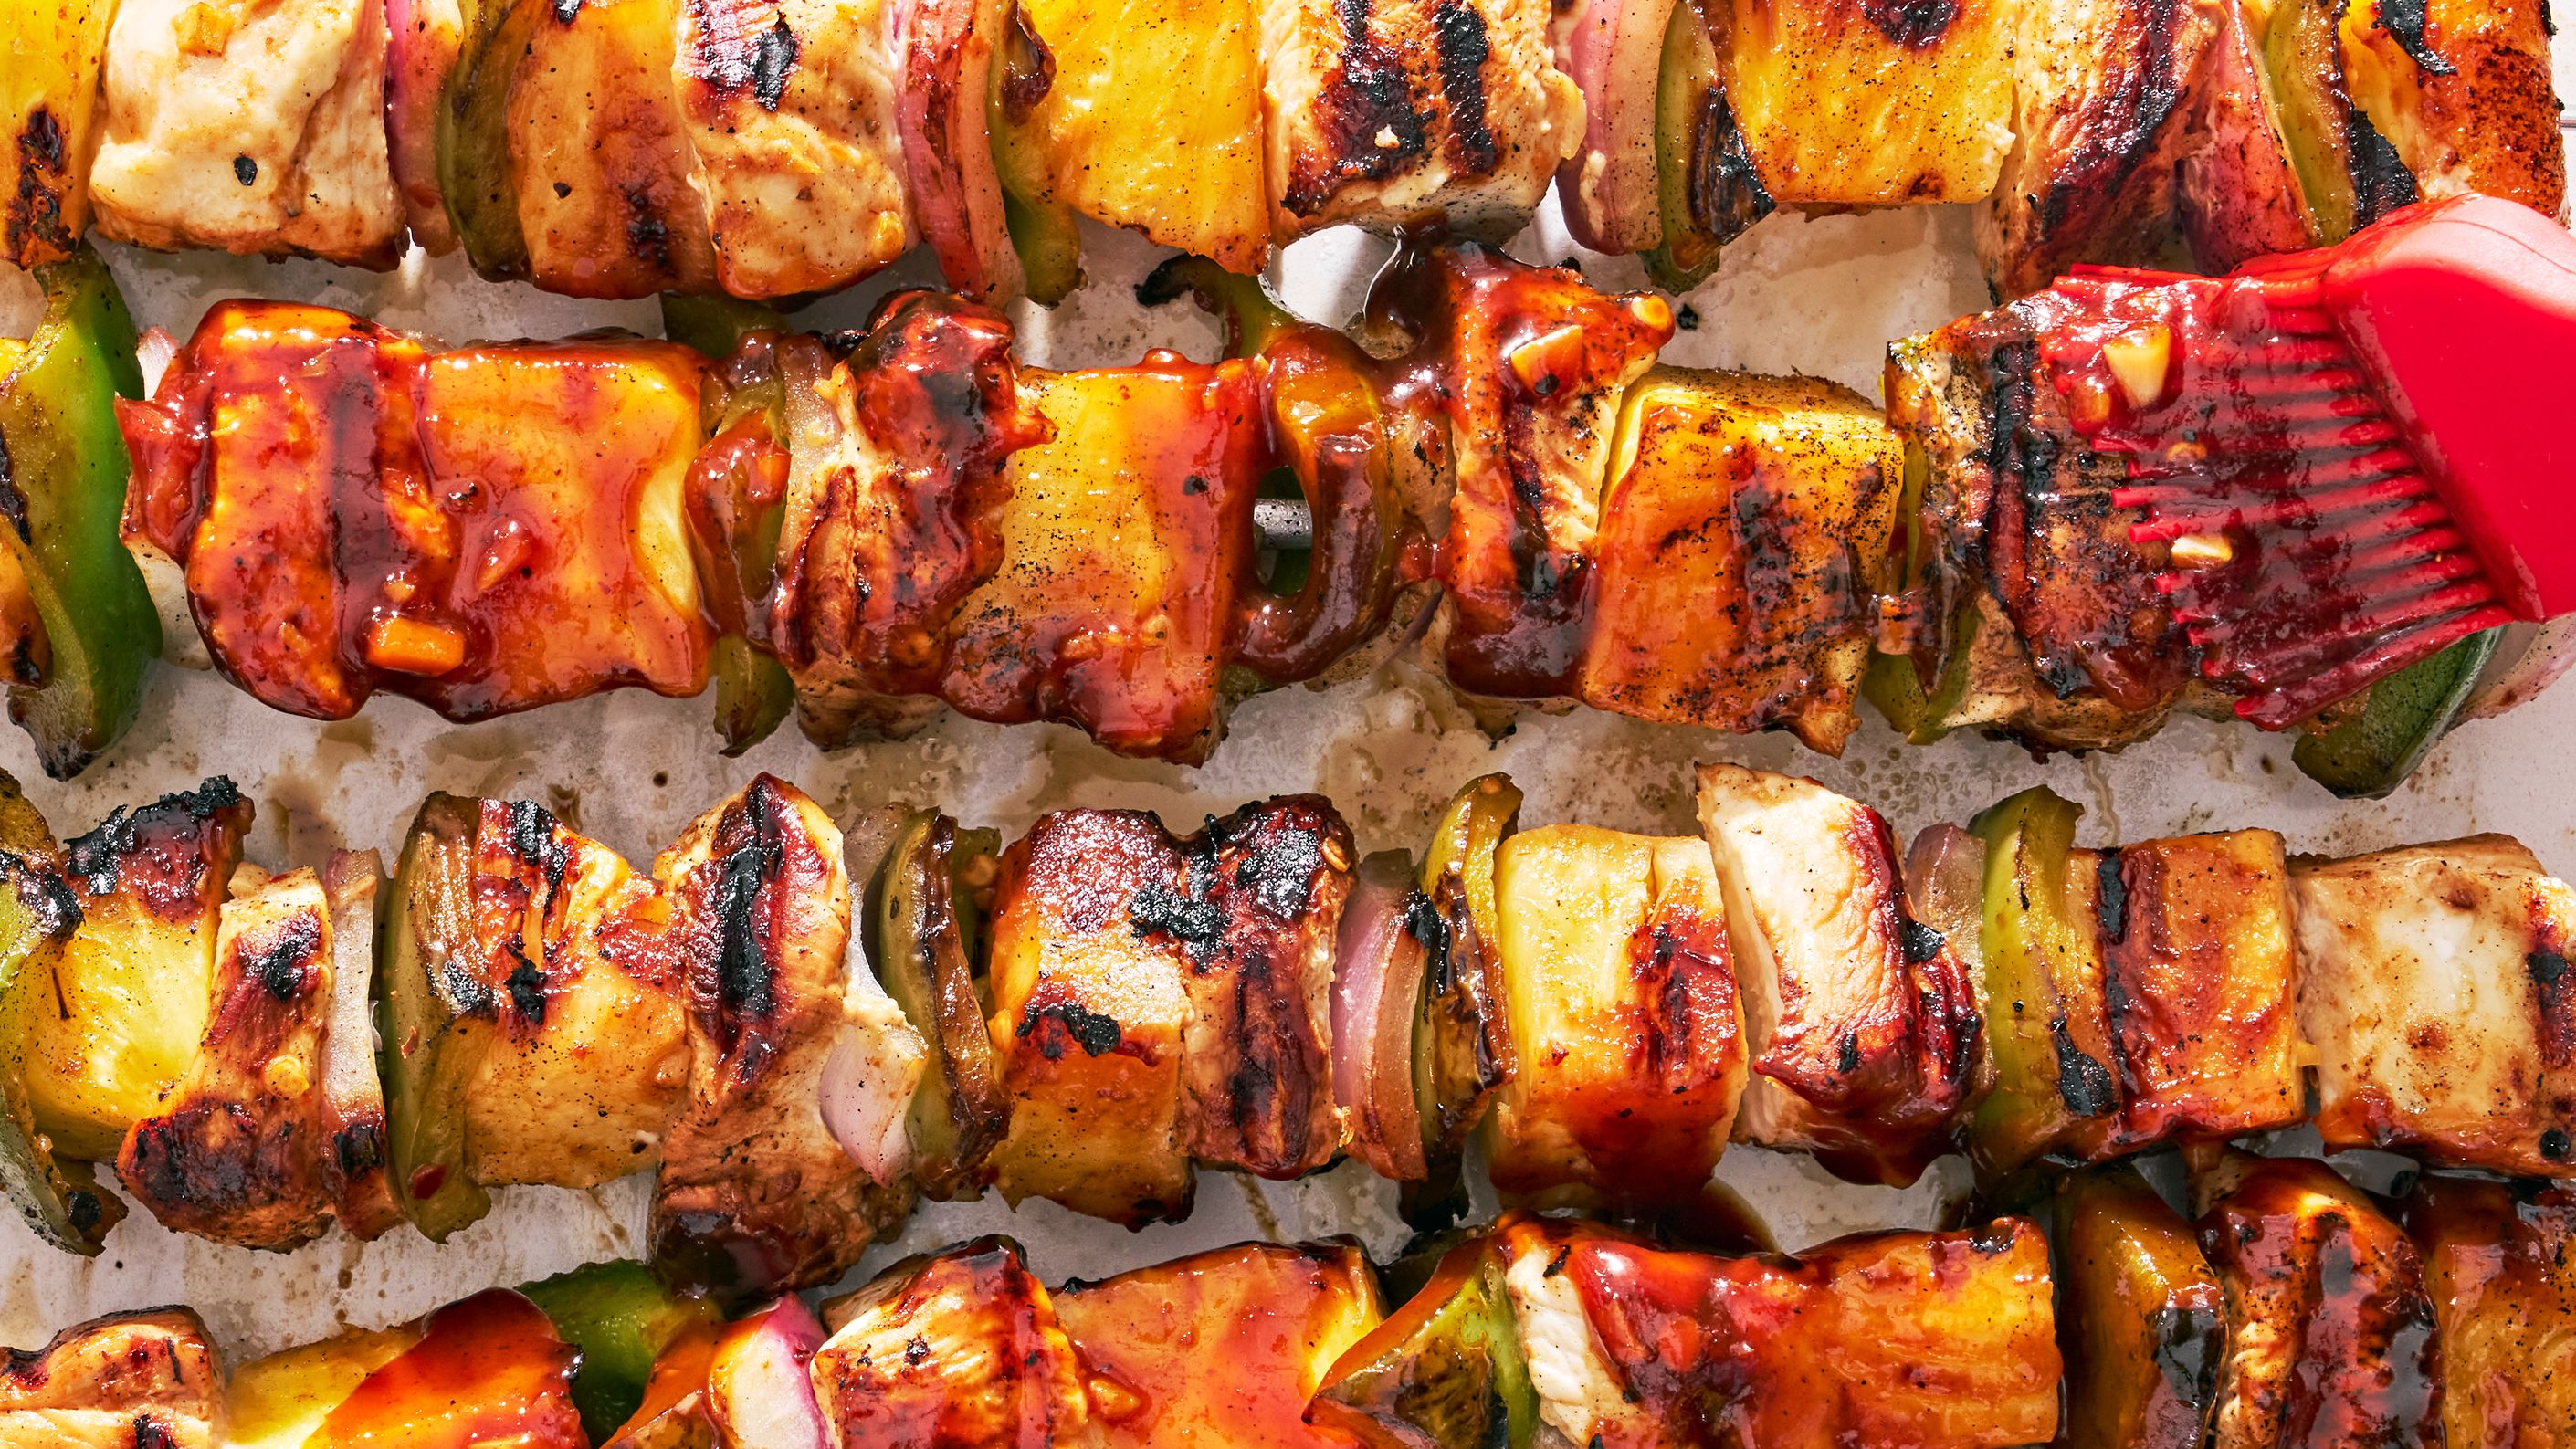 Grilled Chicken Skewers {with Peppers} - Out Grilling